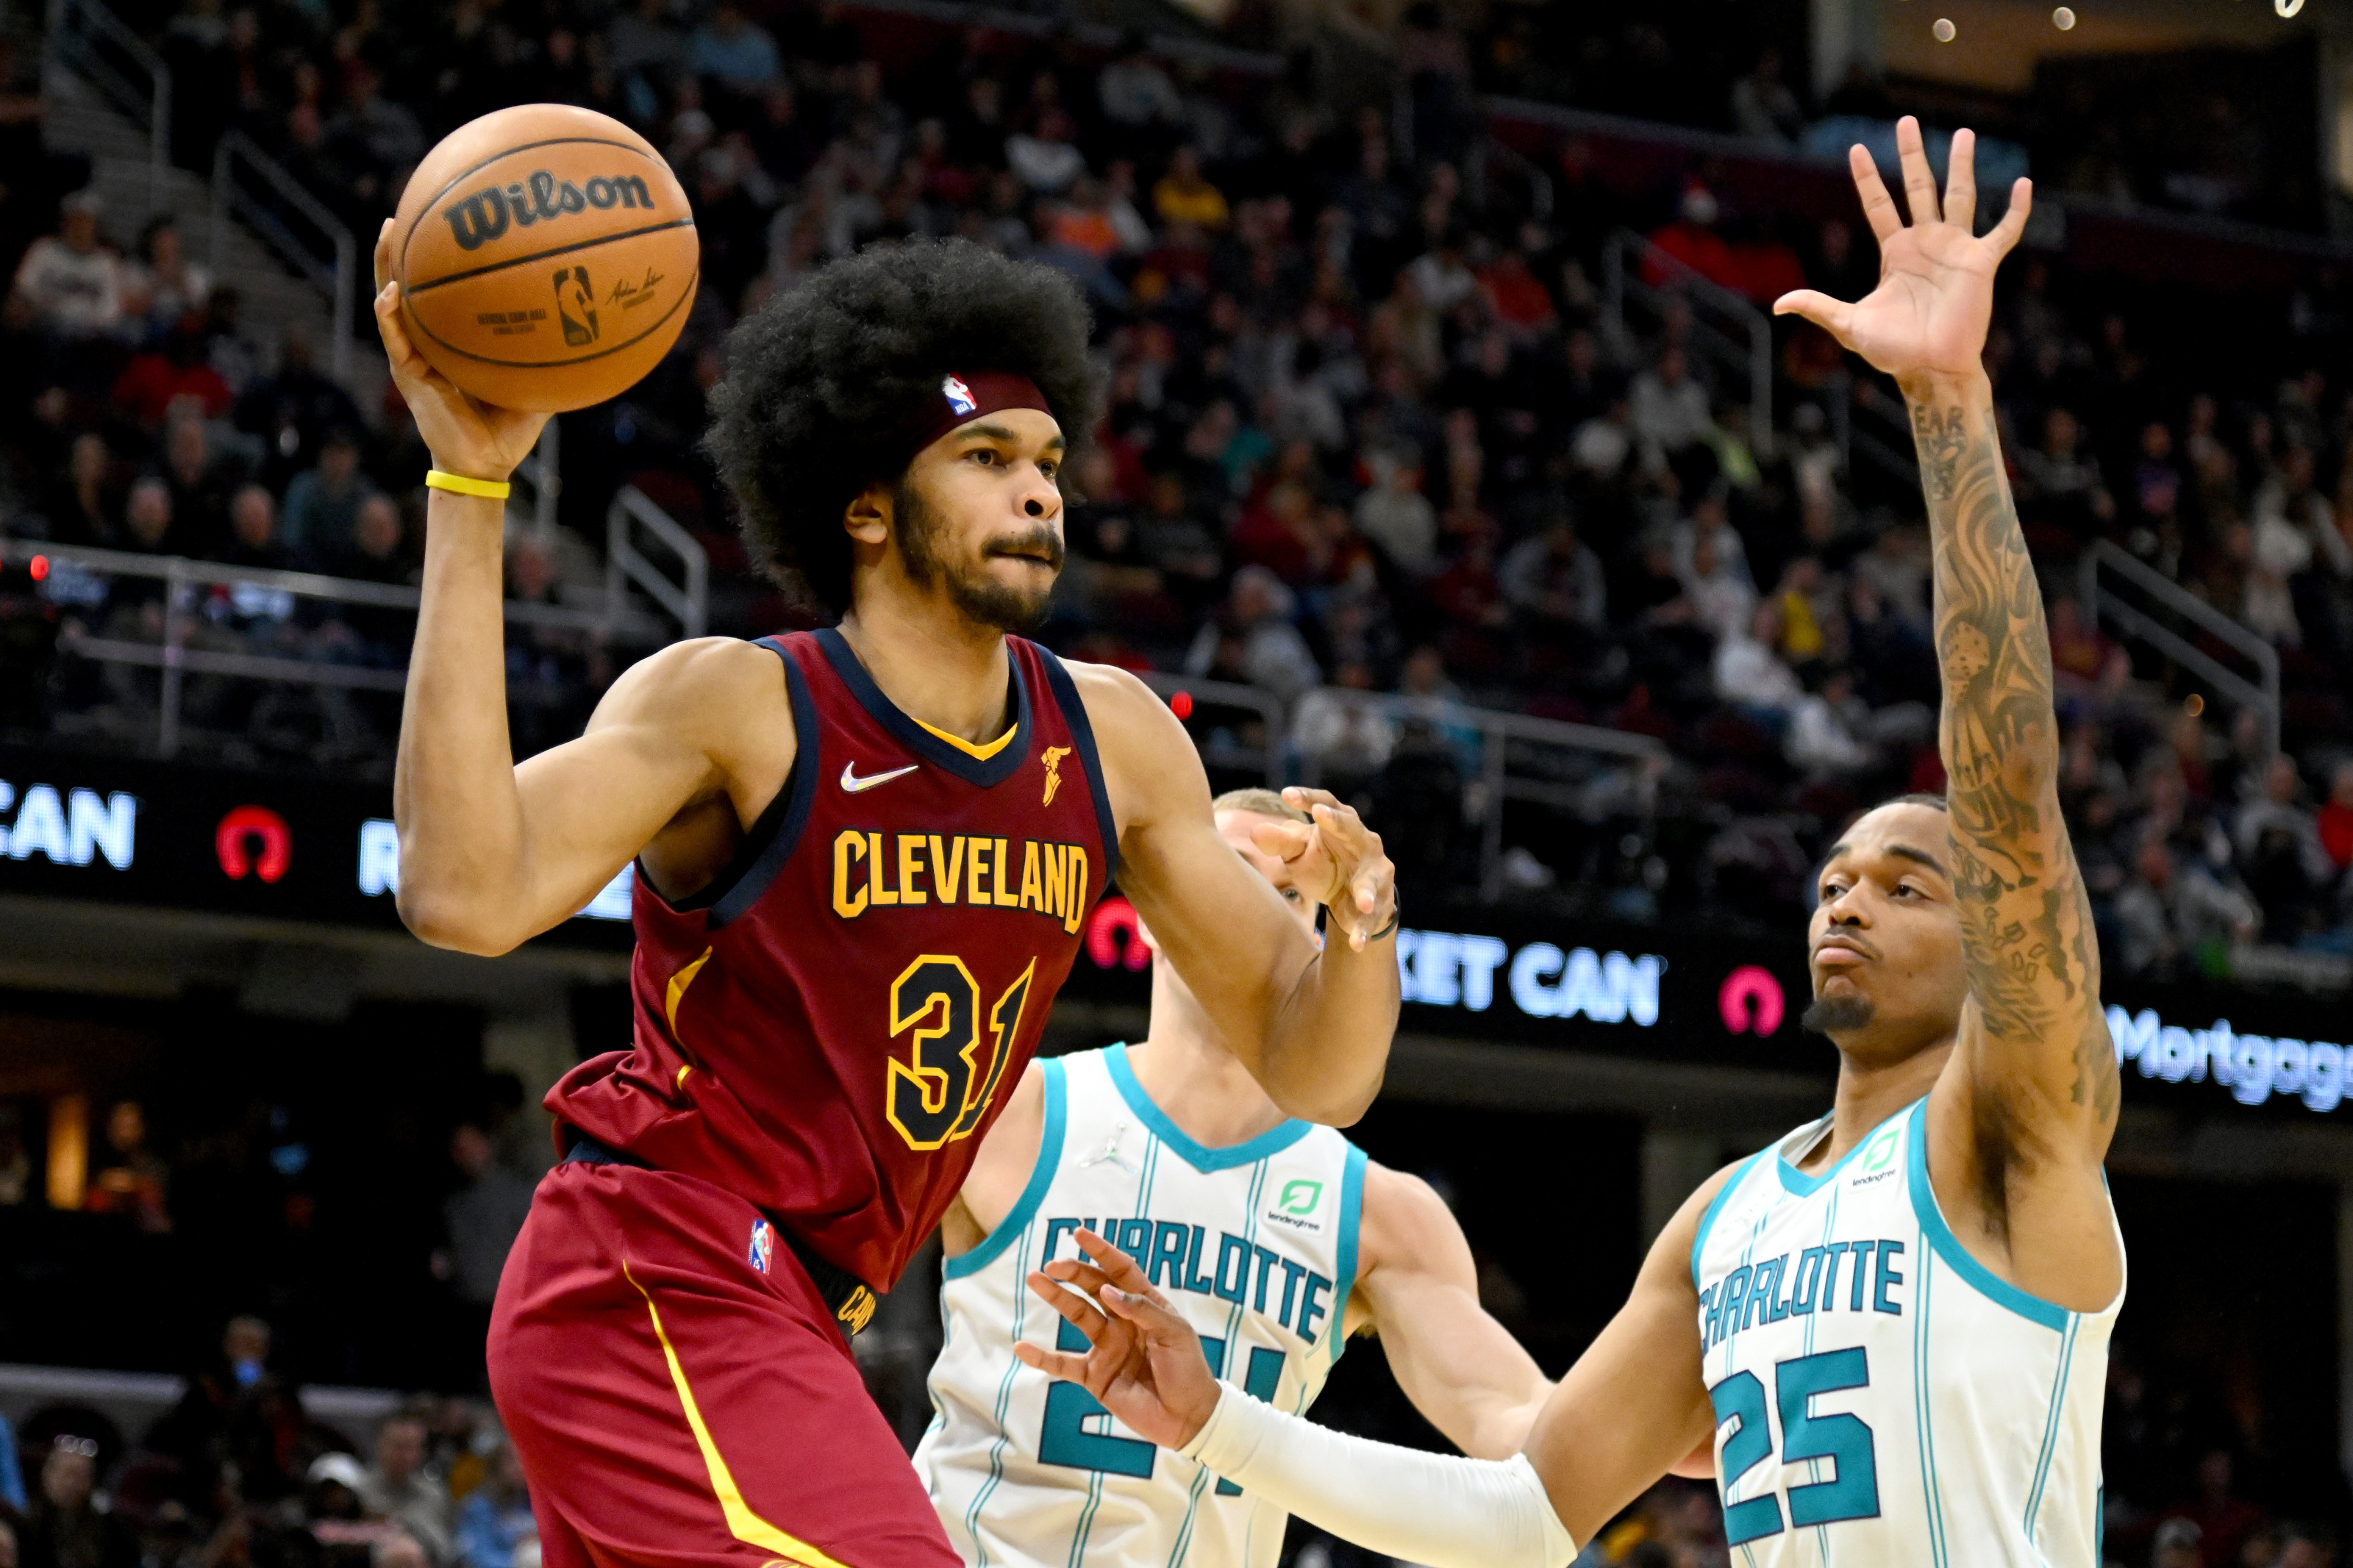 Cleveland Cavaliers Game Tonight Cavs vs Hornets Odds, Starting Lineup, Injury Report, Predictions, TV channel for Nov